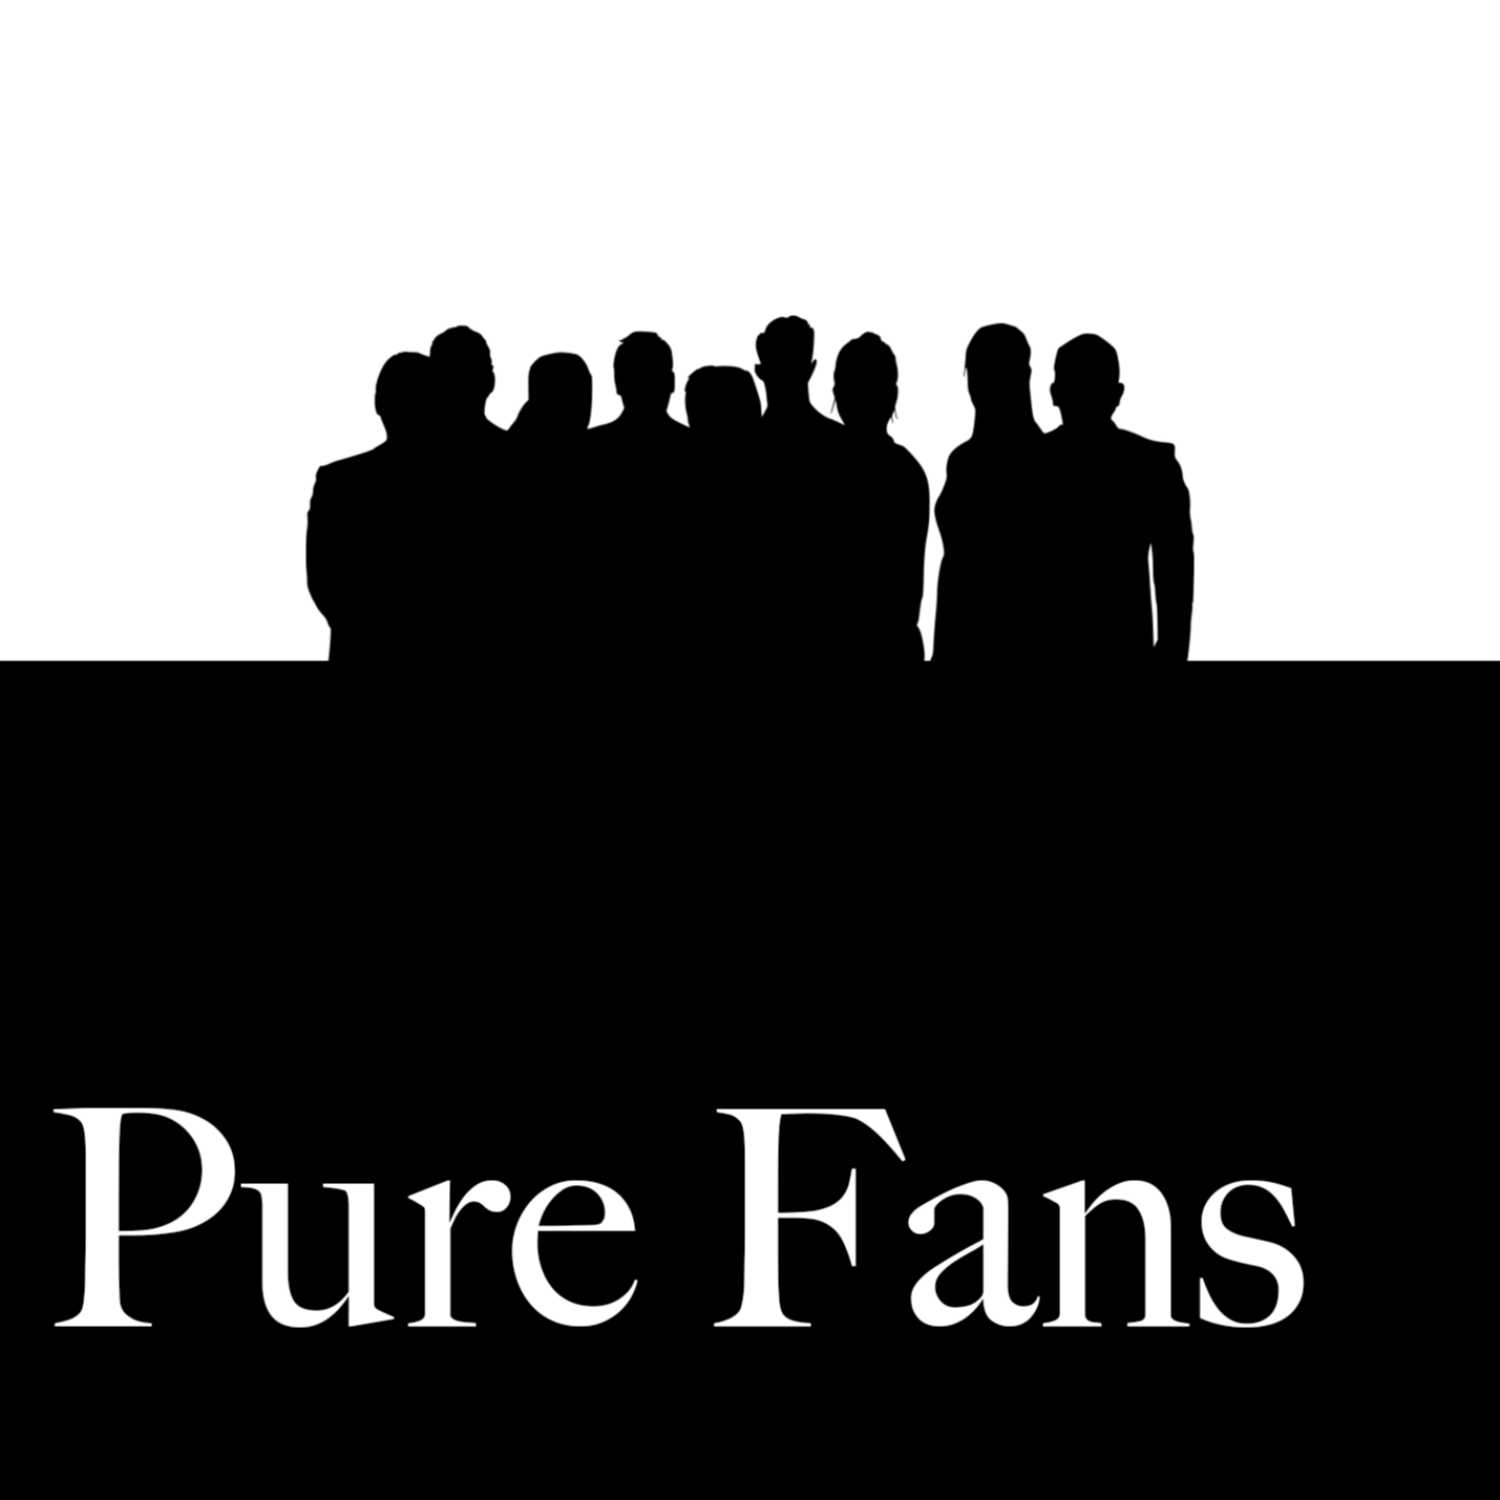 The Pure Fans Podcast